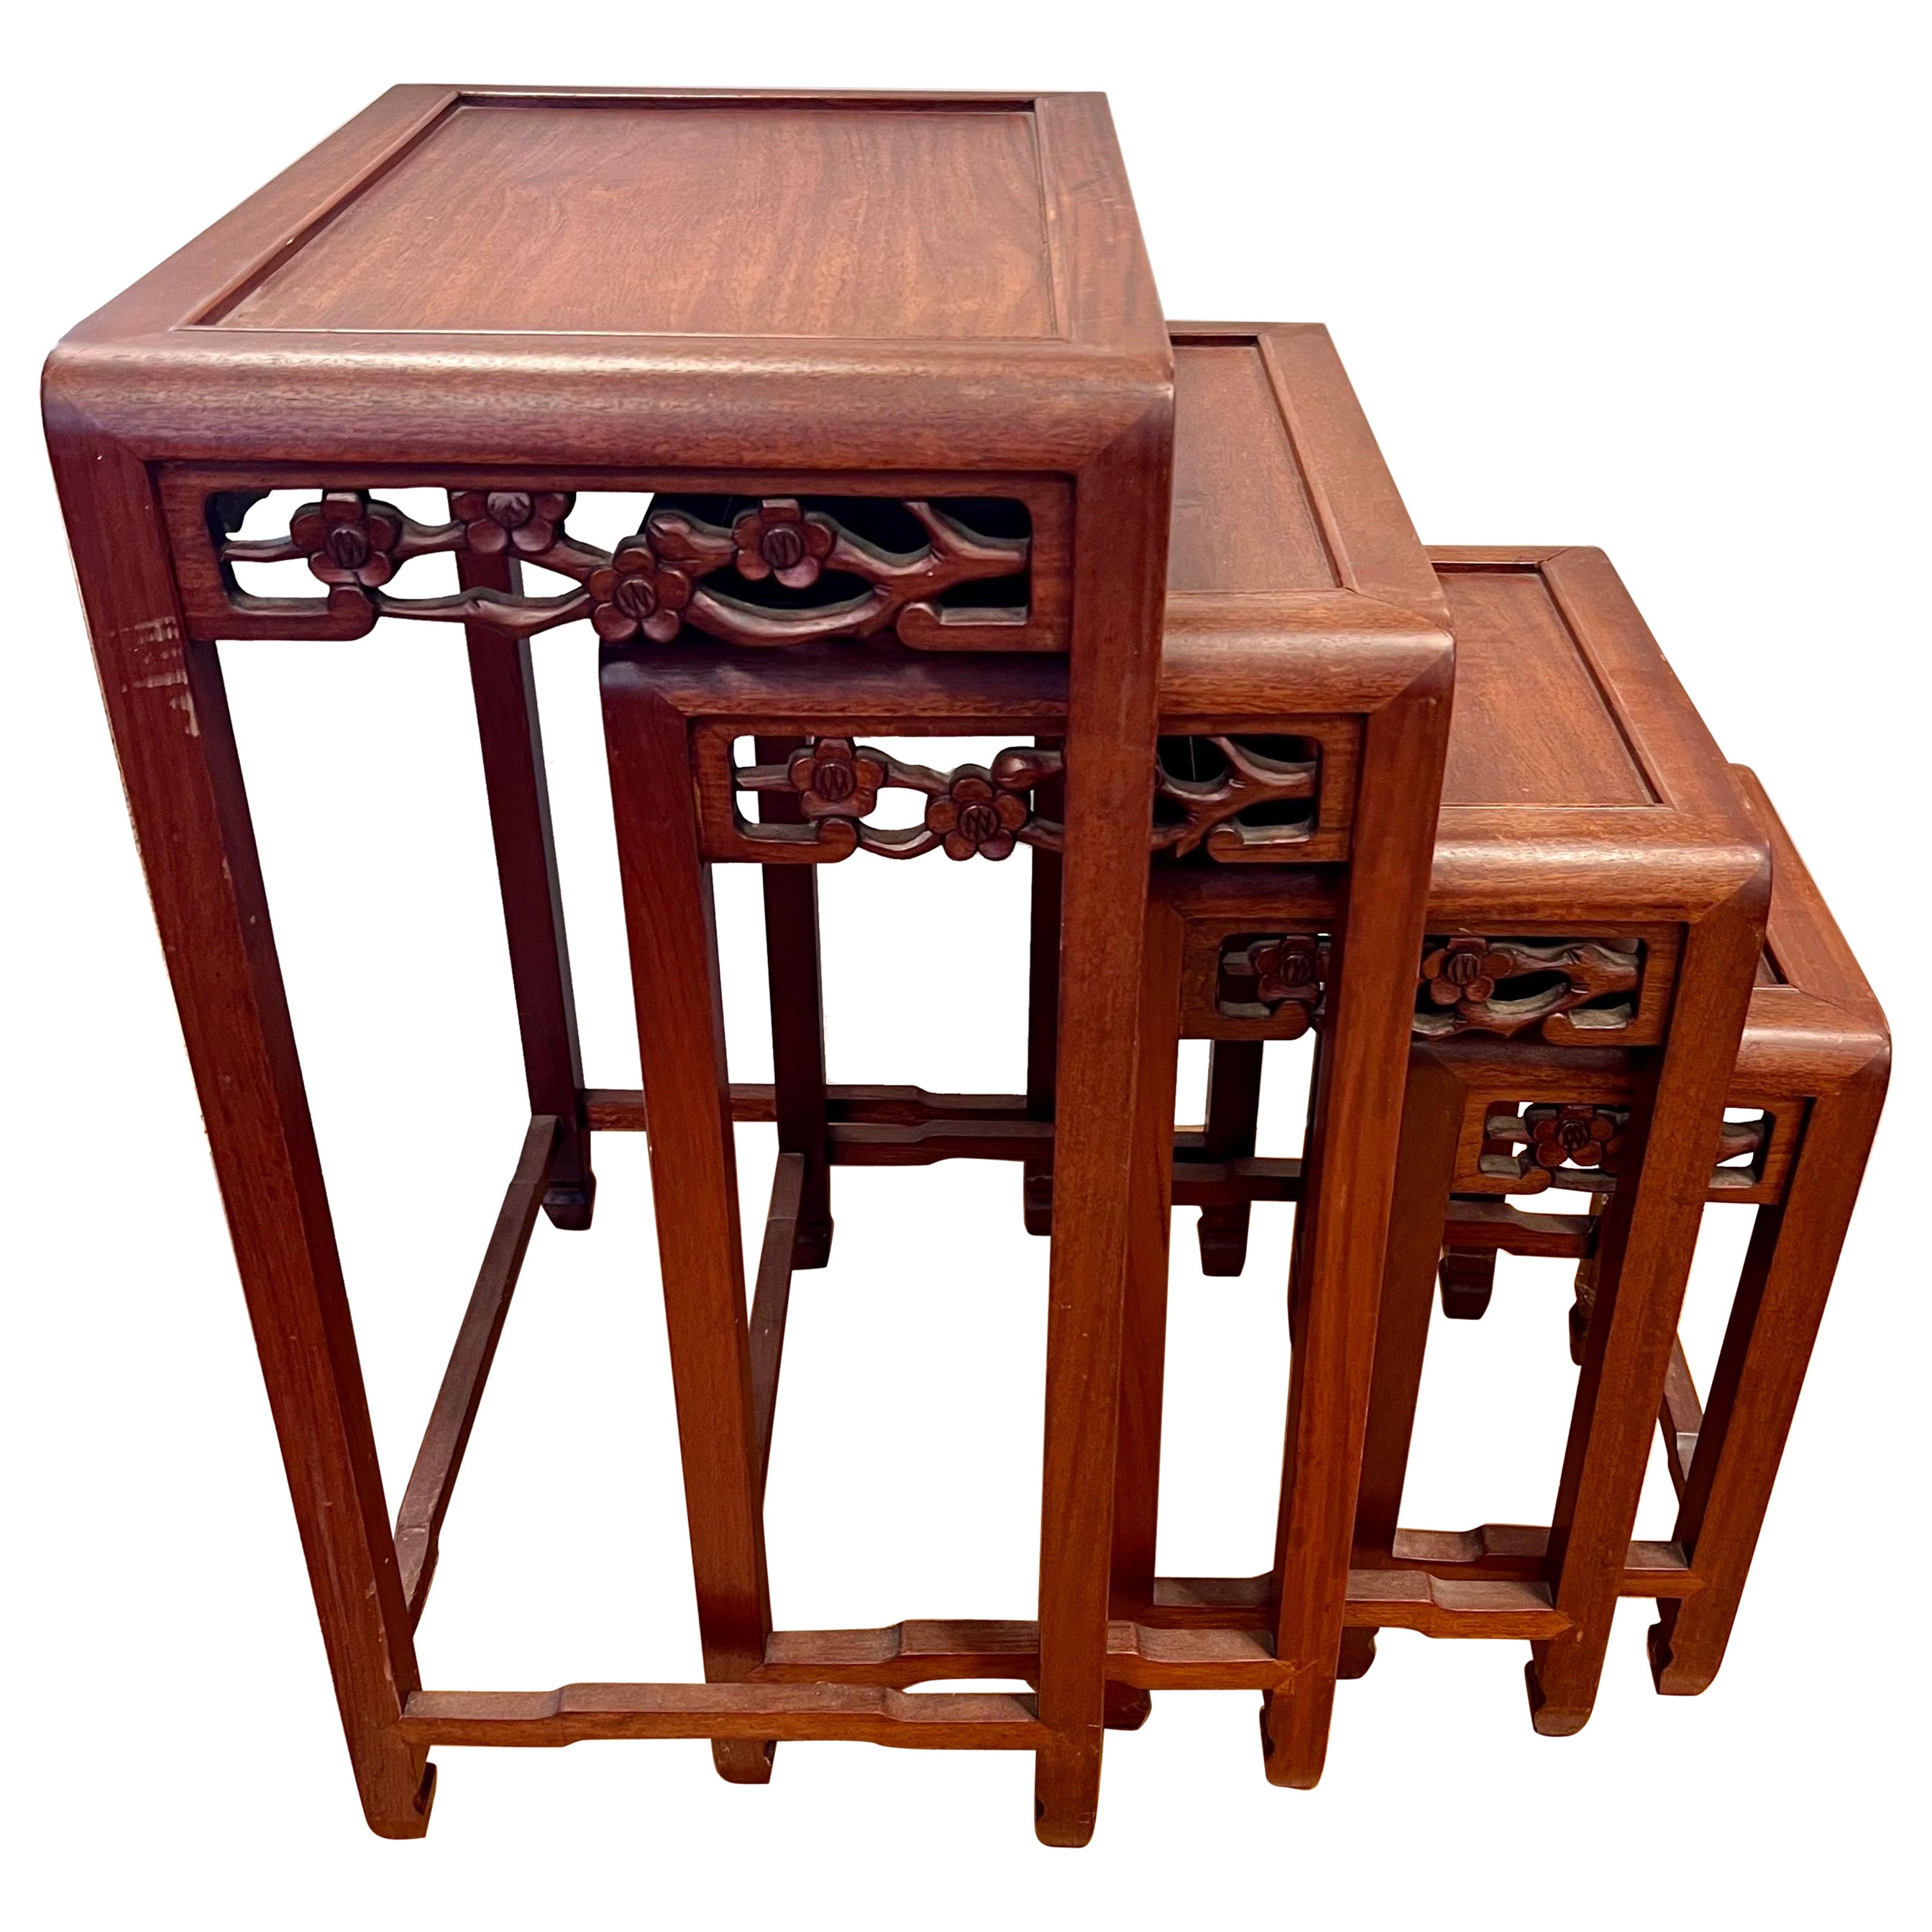 Set of 4 Chinese Asian Carved Nesting Tables Chinoiserie Mid-Century Modern For Sale